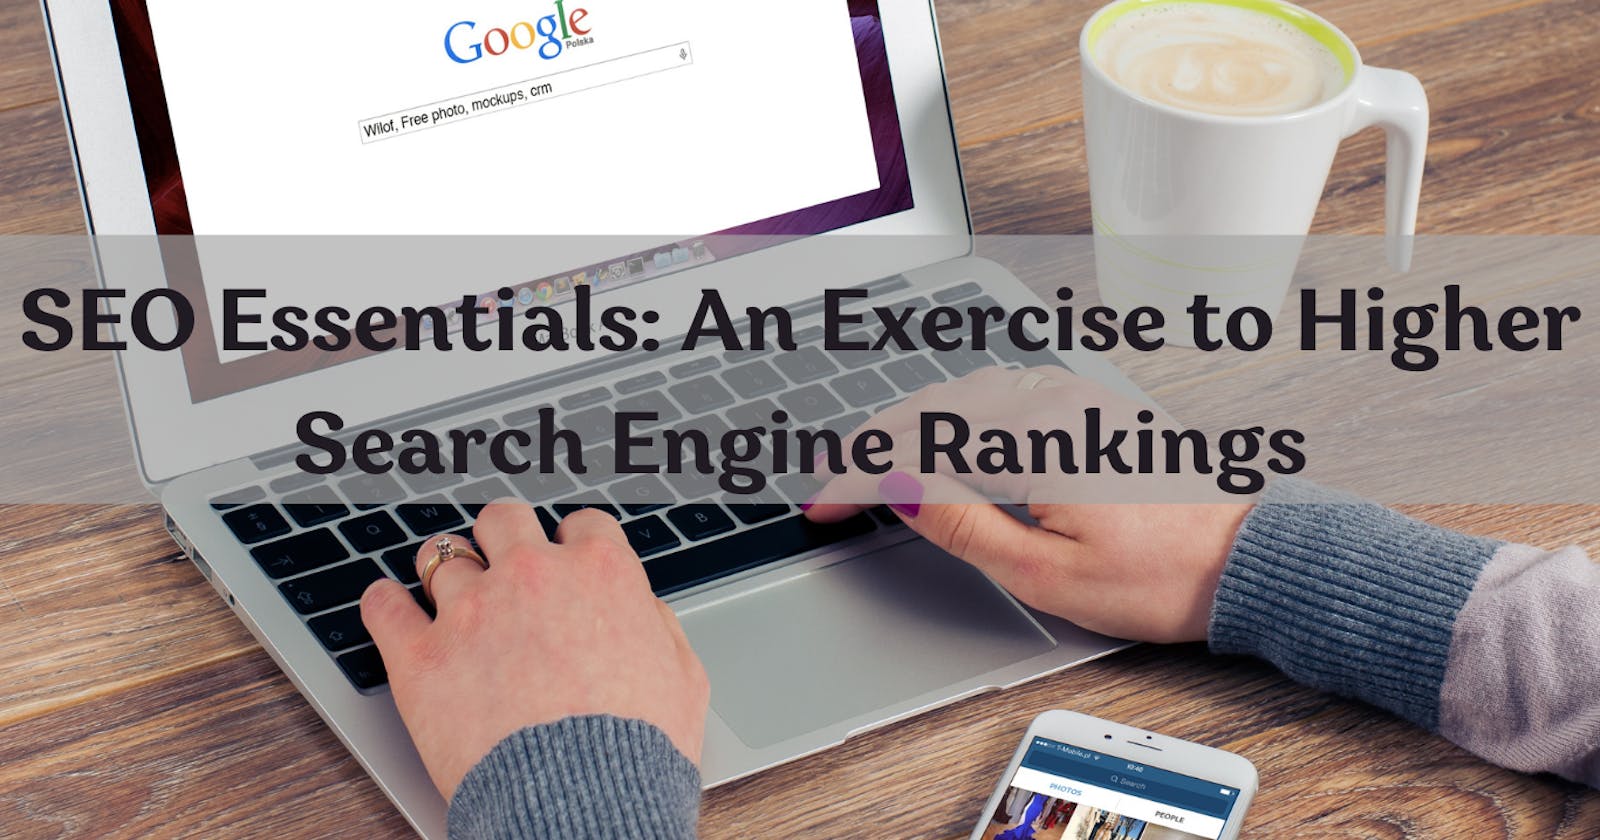 SEO Essentials: An Exercise to Higher Search Engine Rankings